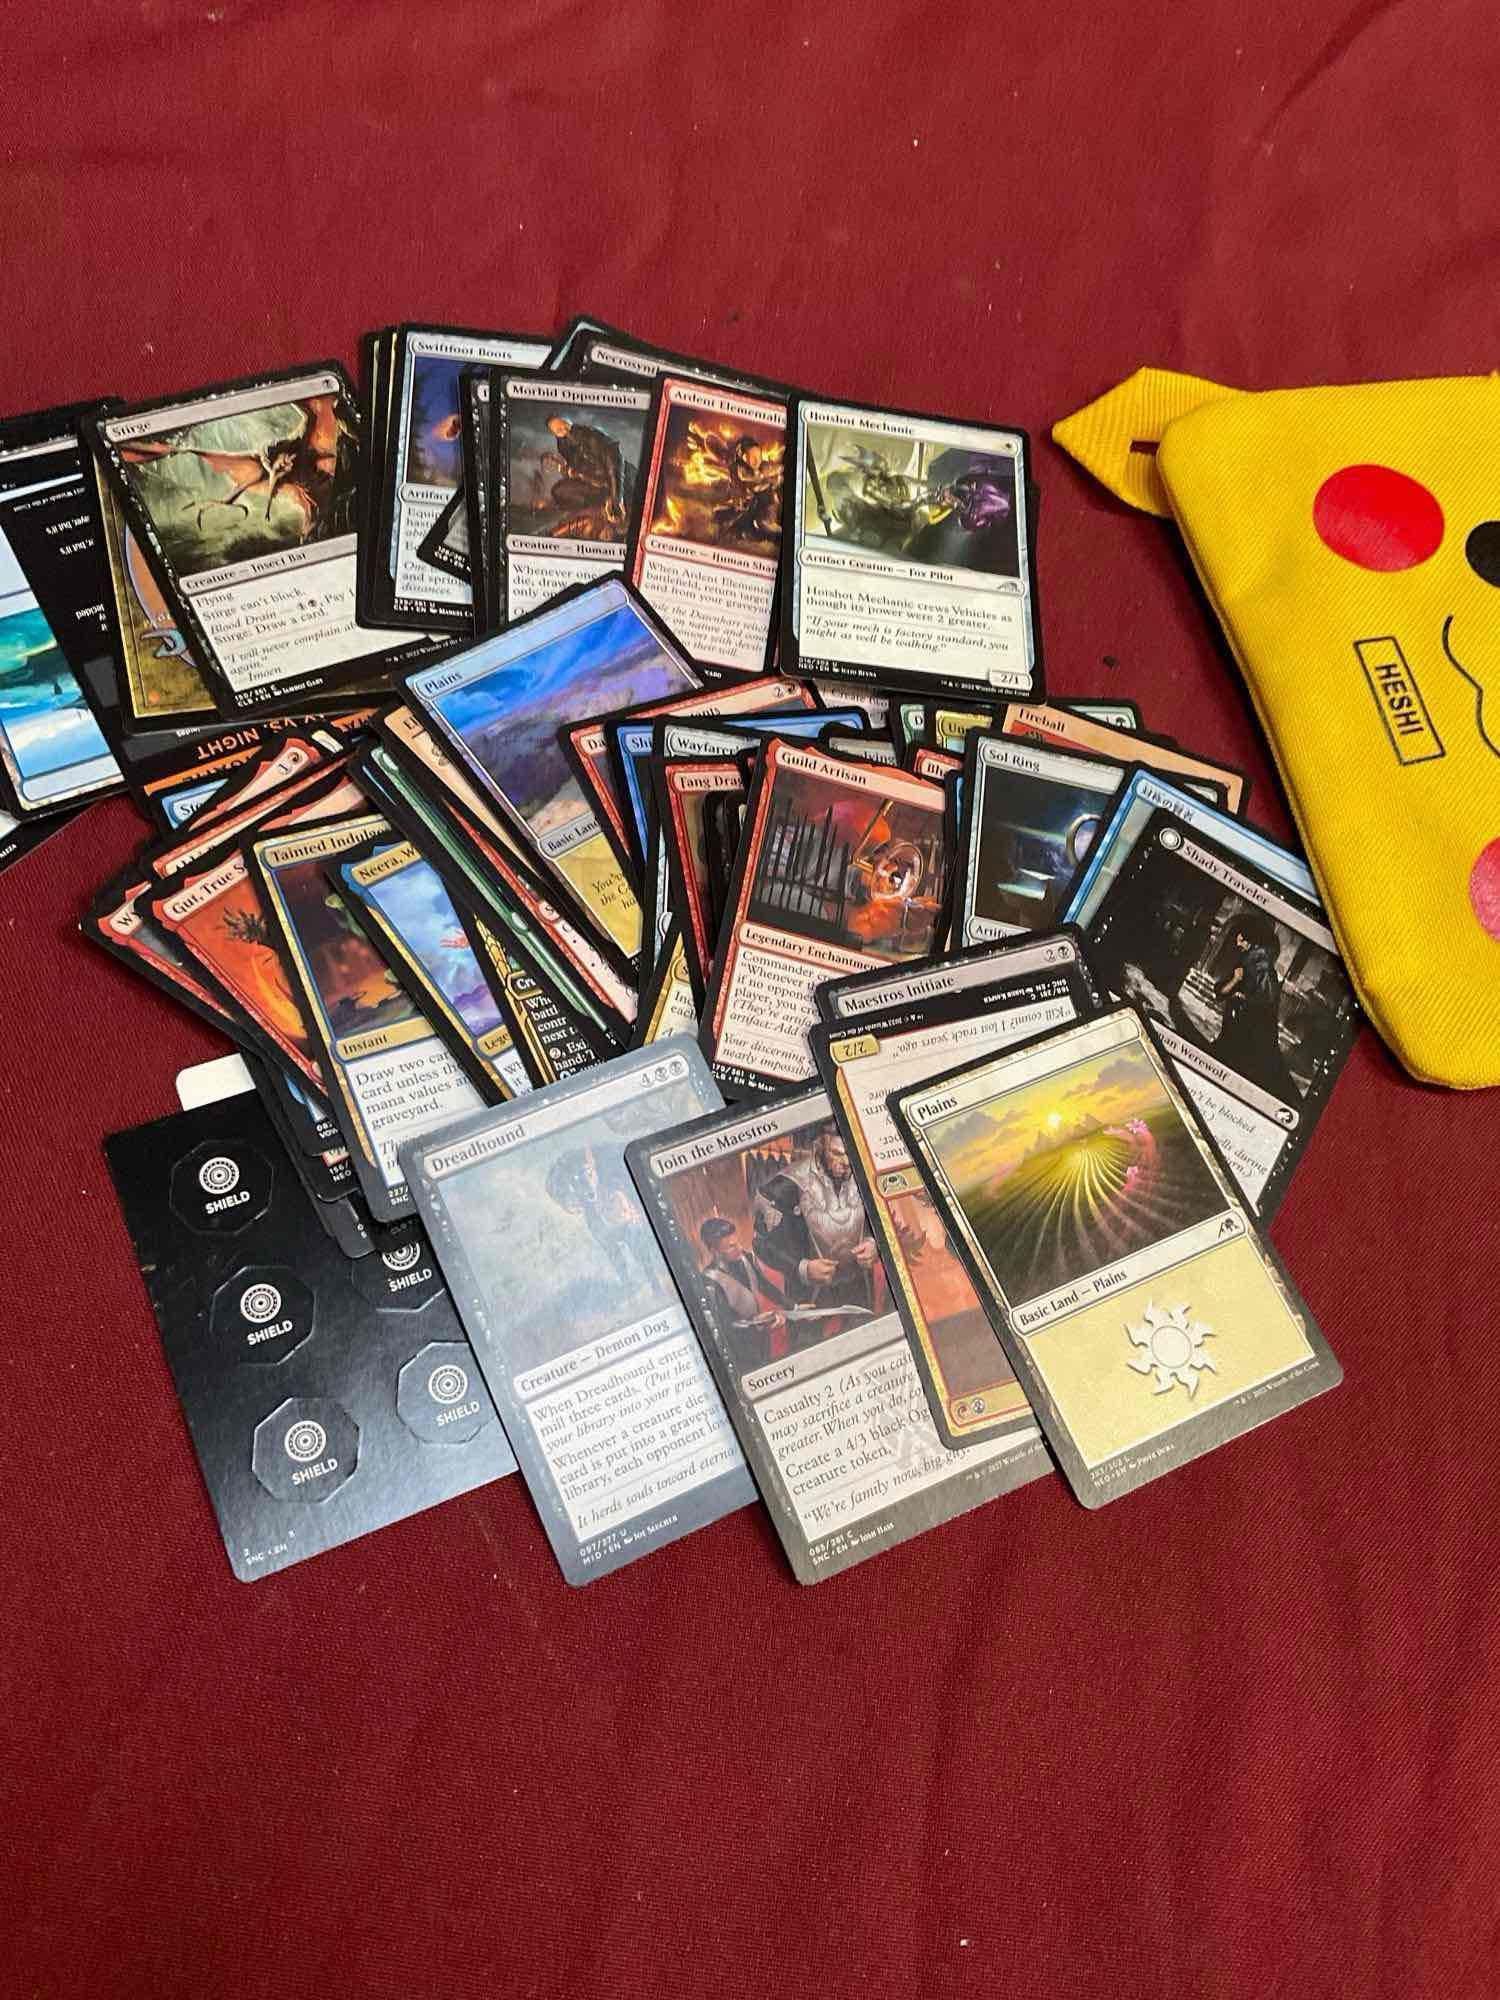 Magic The Gathering Deck Master cards 78 pieces, Heshi bag, Xena & Star Lord dolls